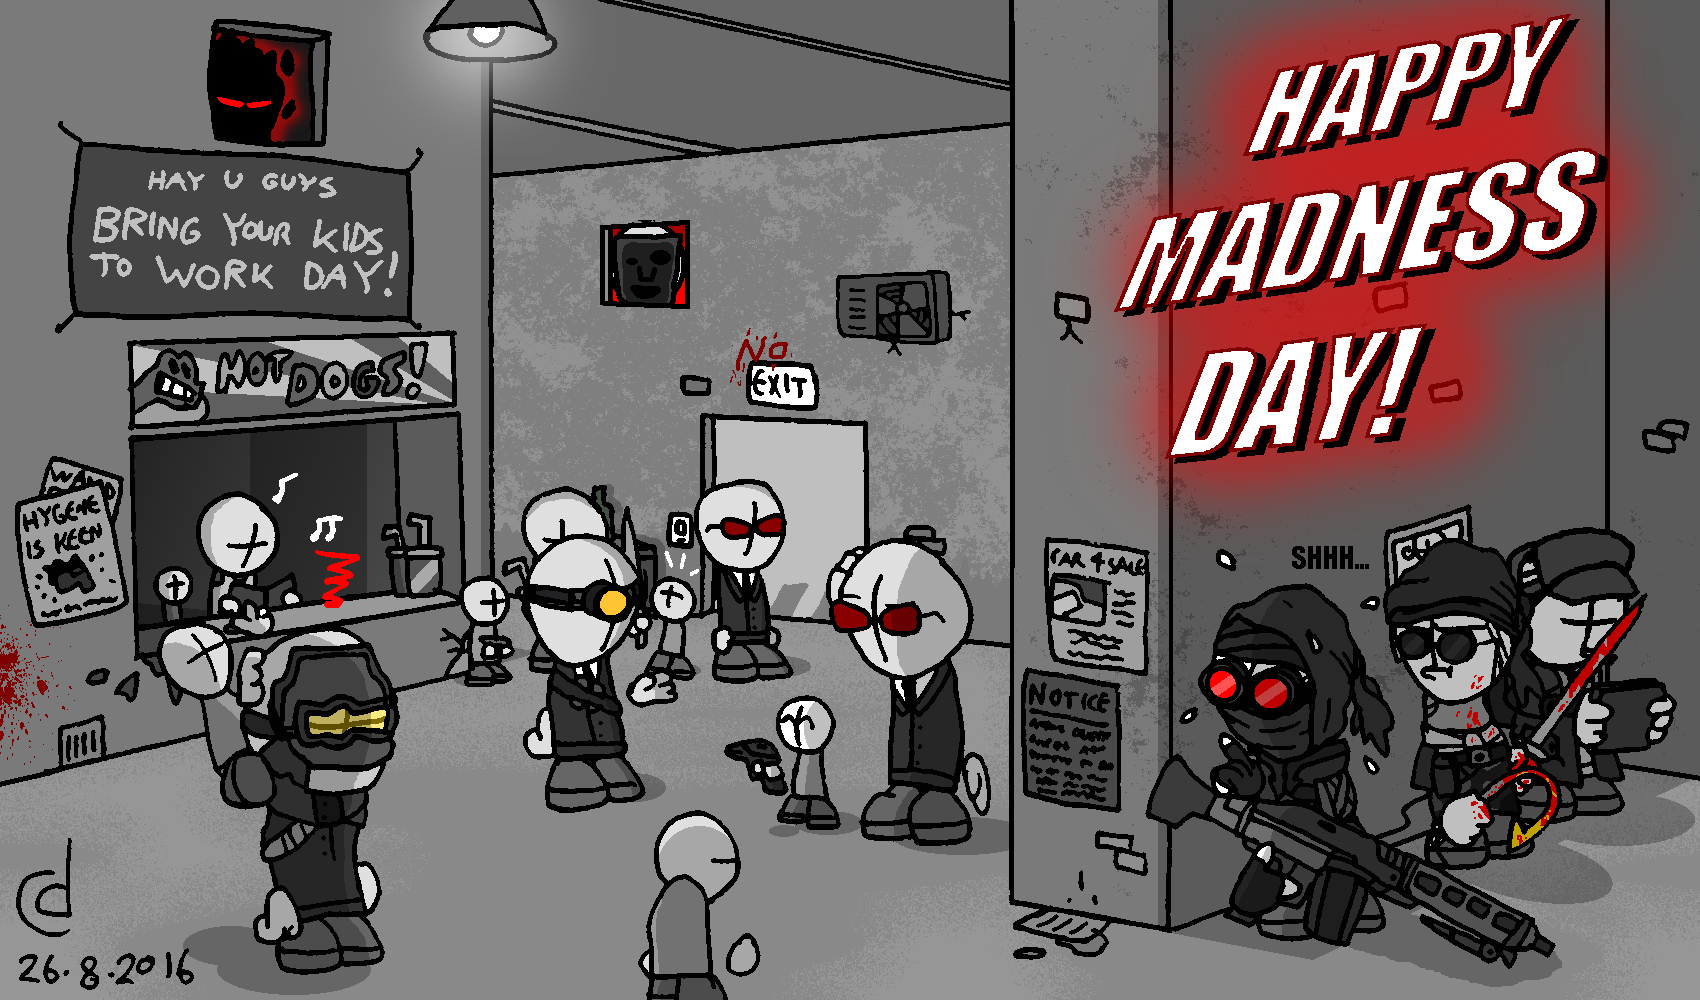 Happy Madness Day! 